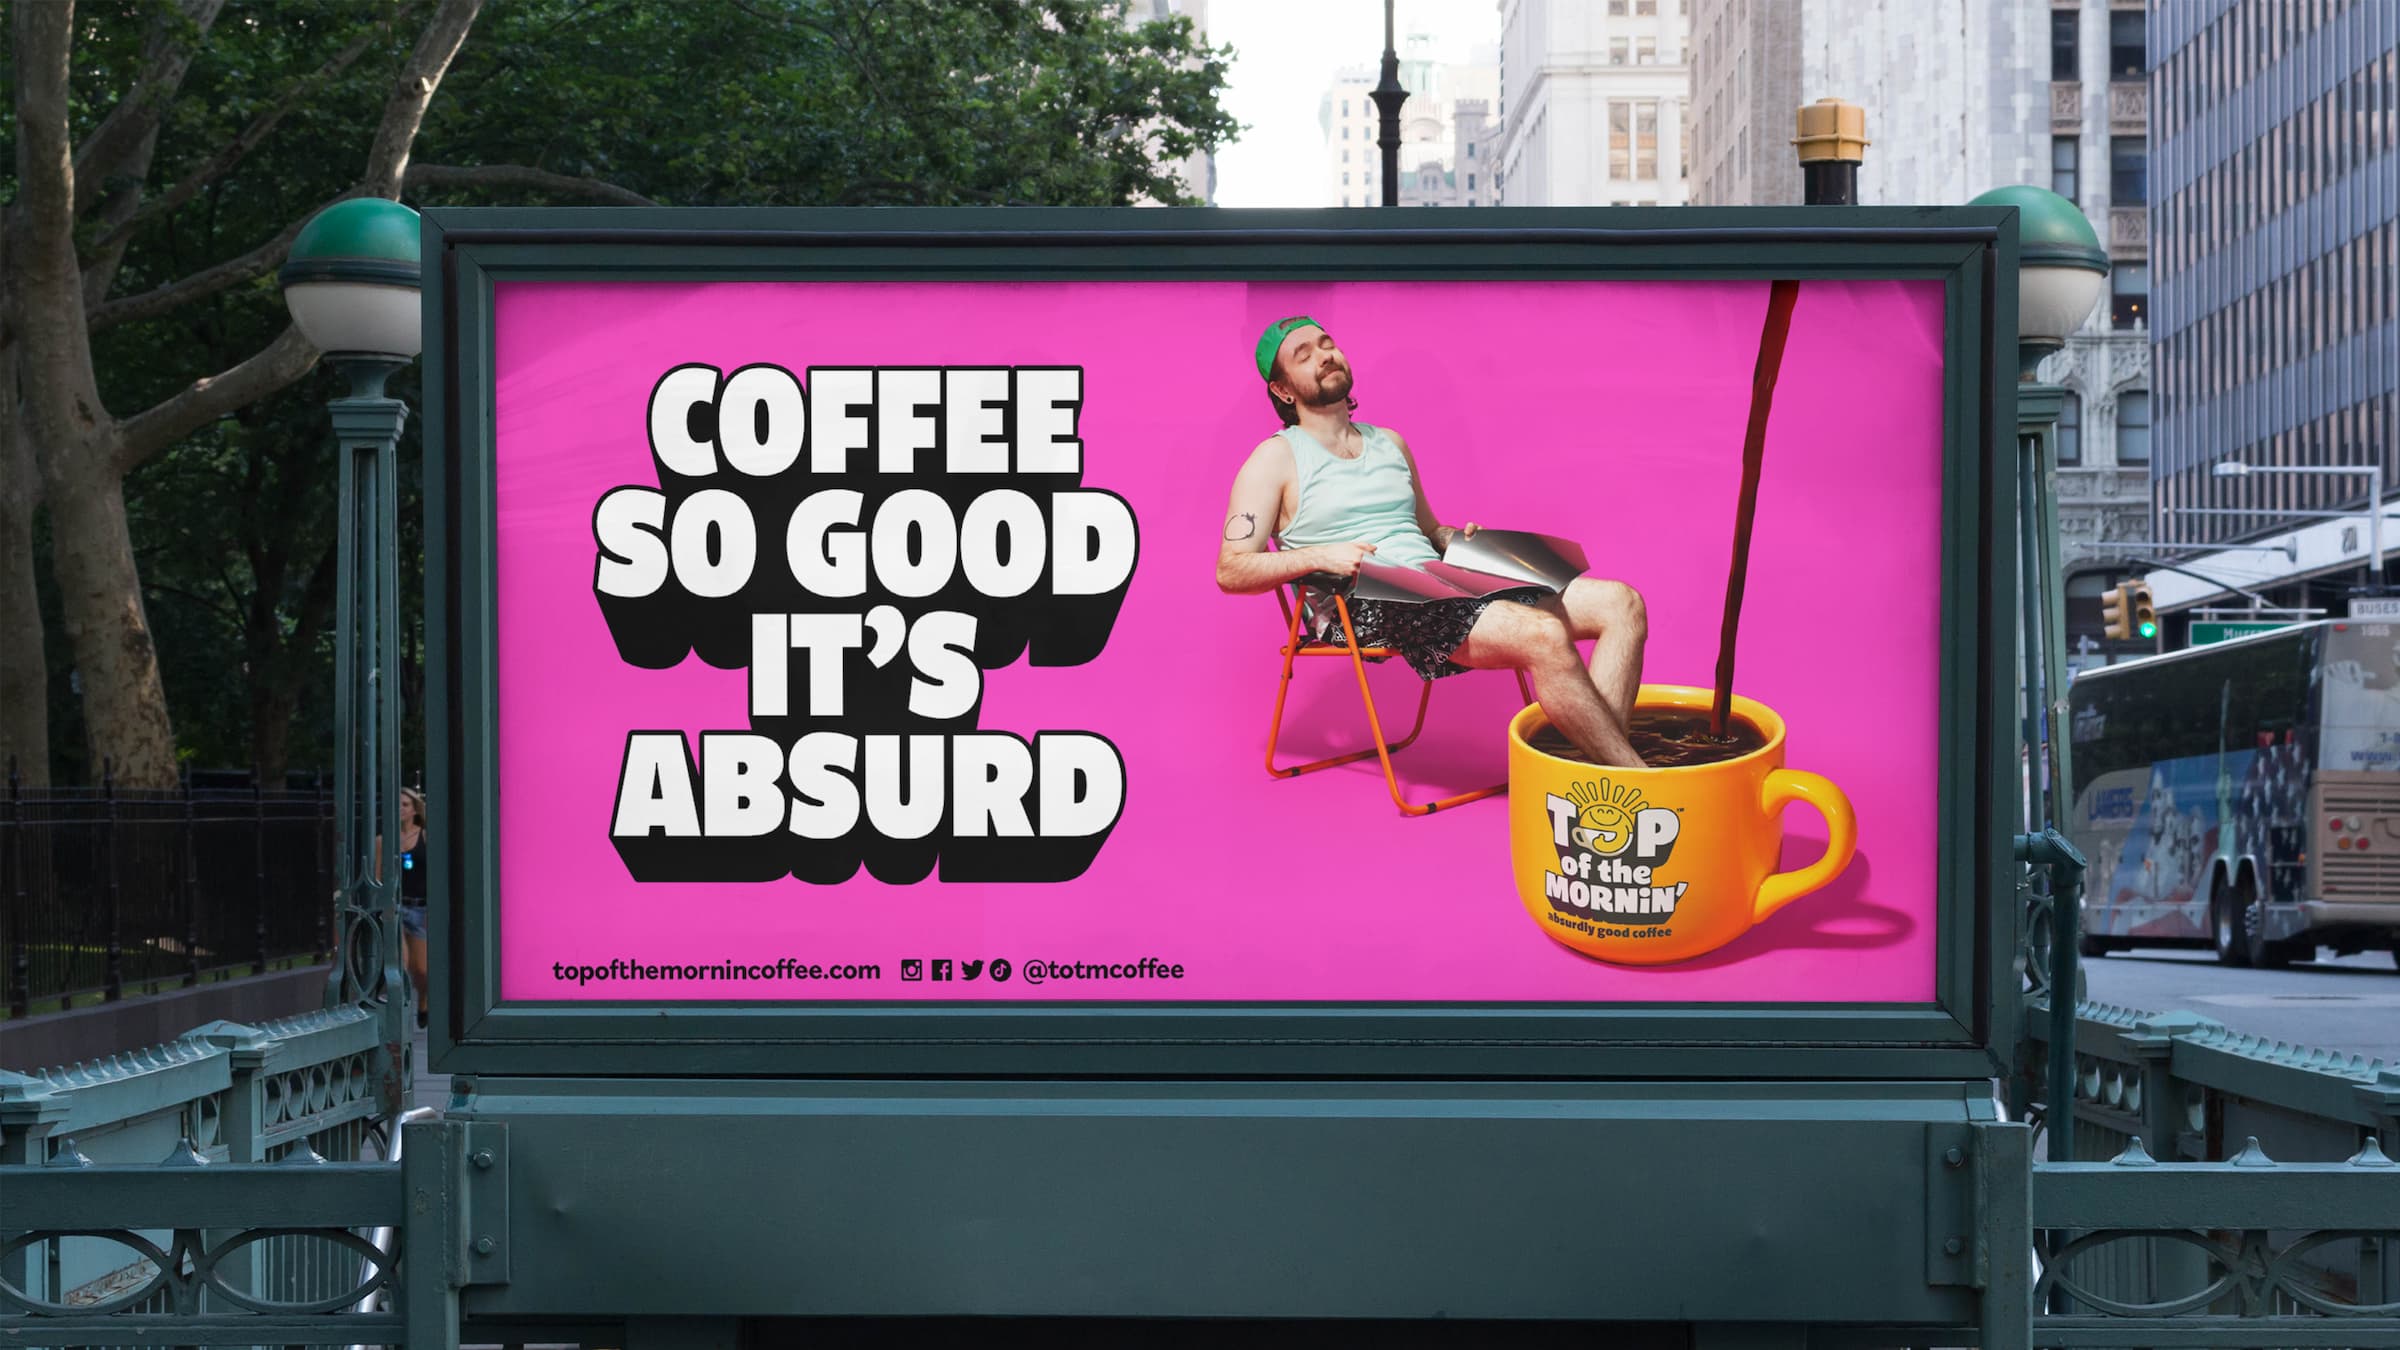 Art direction and billboard design for Top of the Mornin’ Coffee by London-based Earthling Studio.